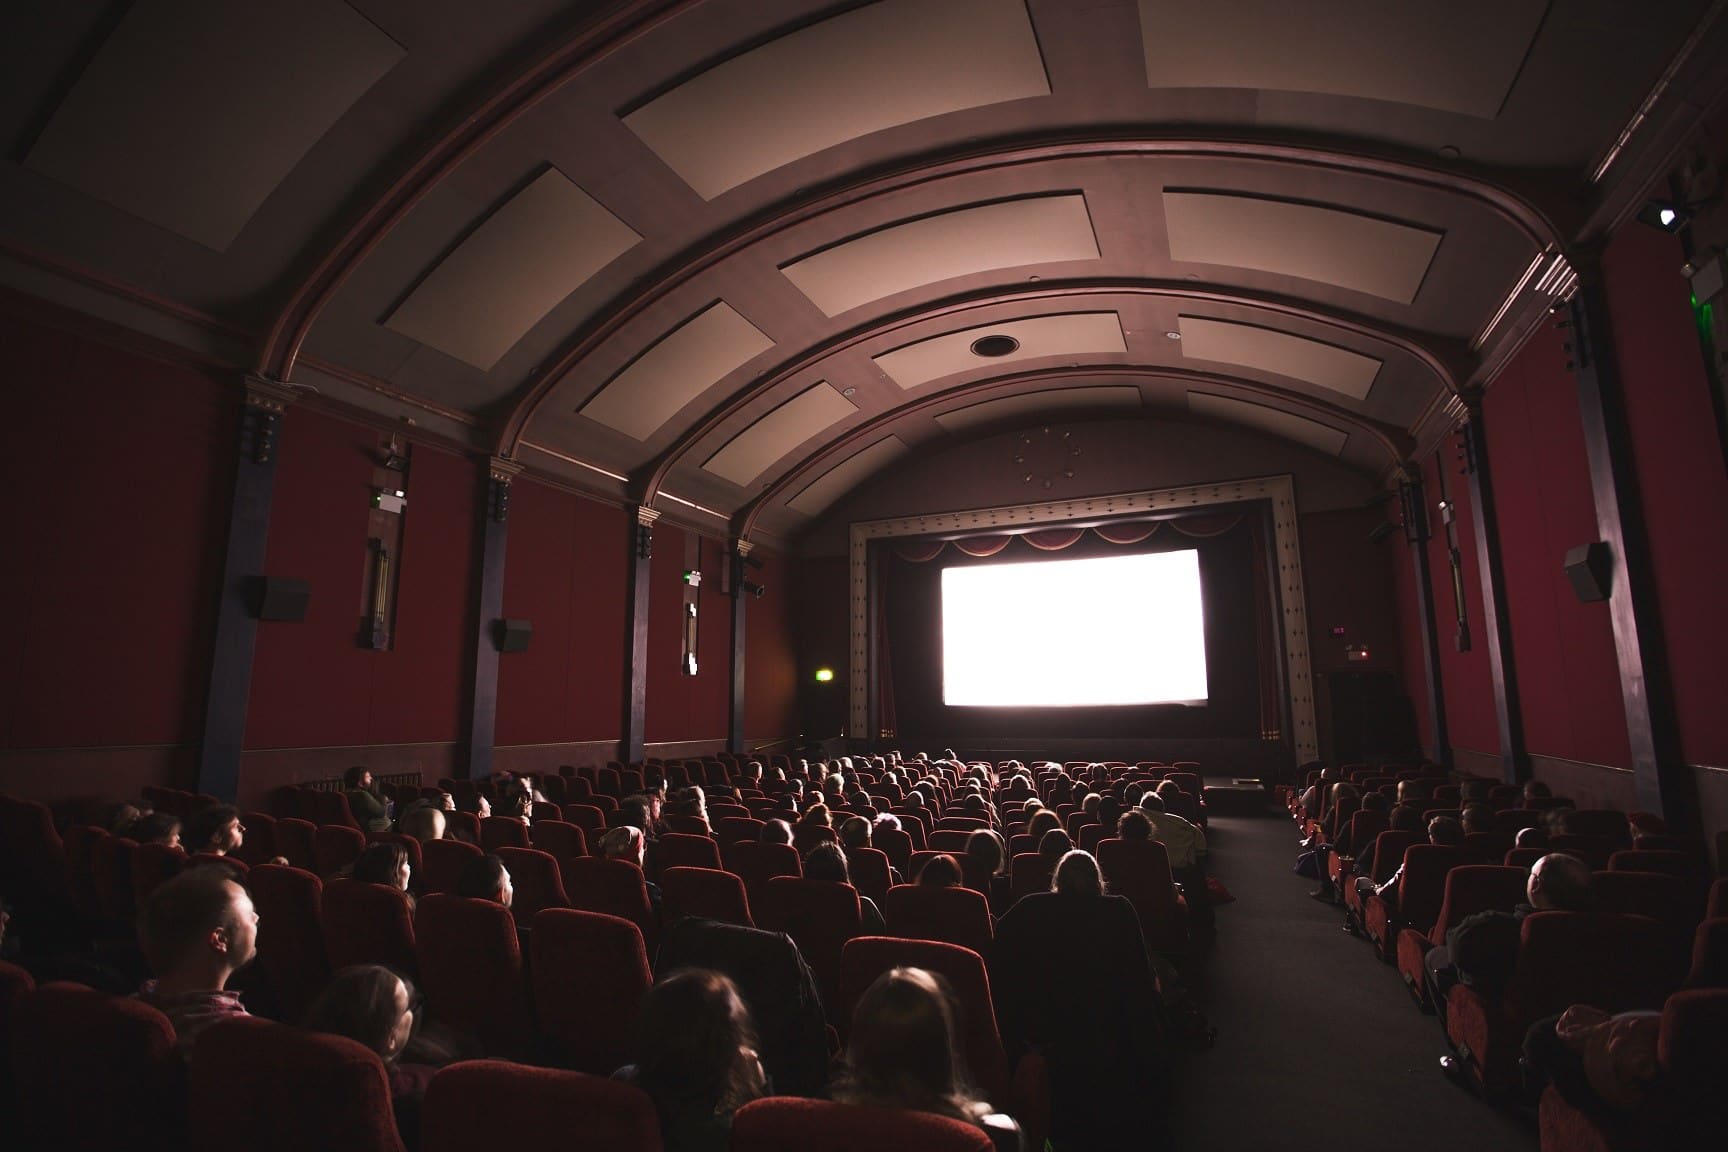 Interior of a movie theater, with audience watching a movie